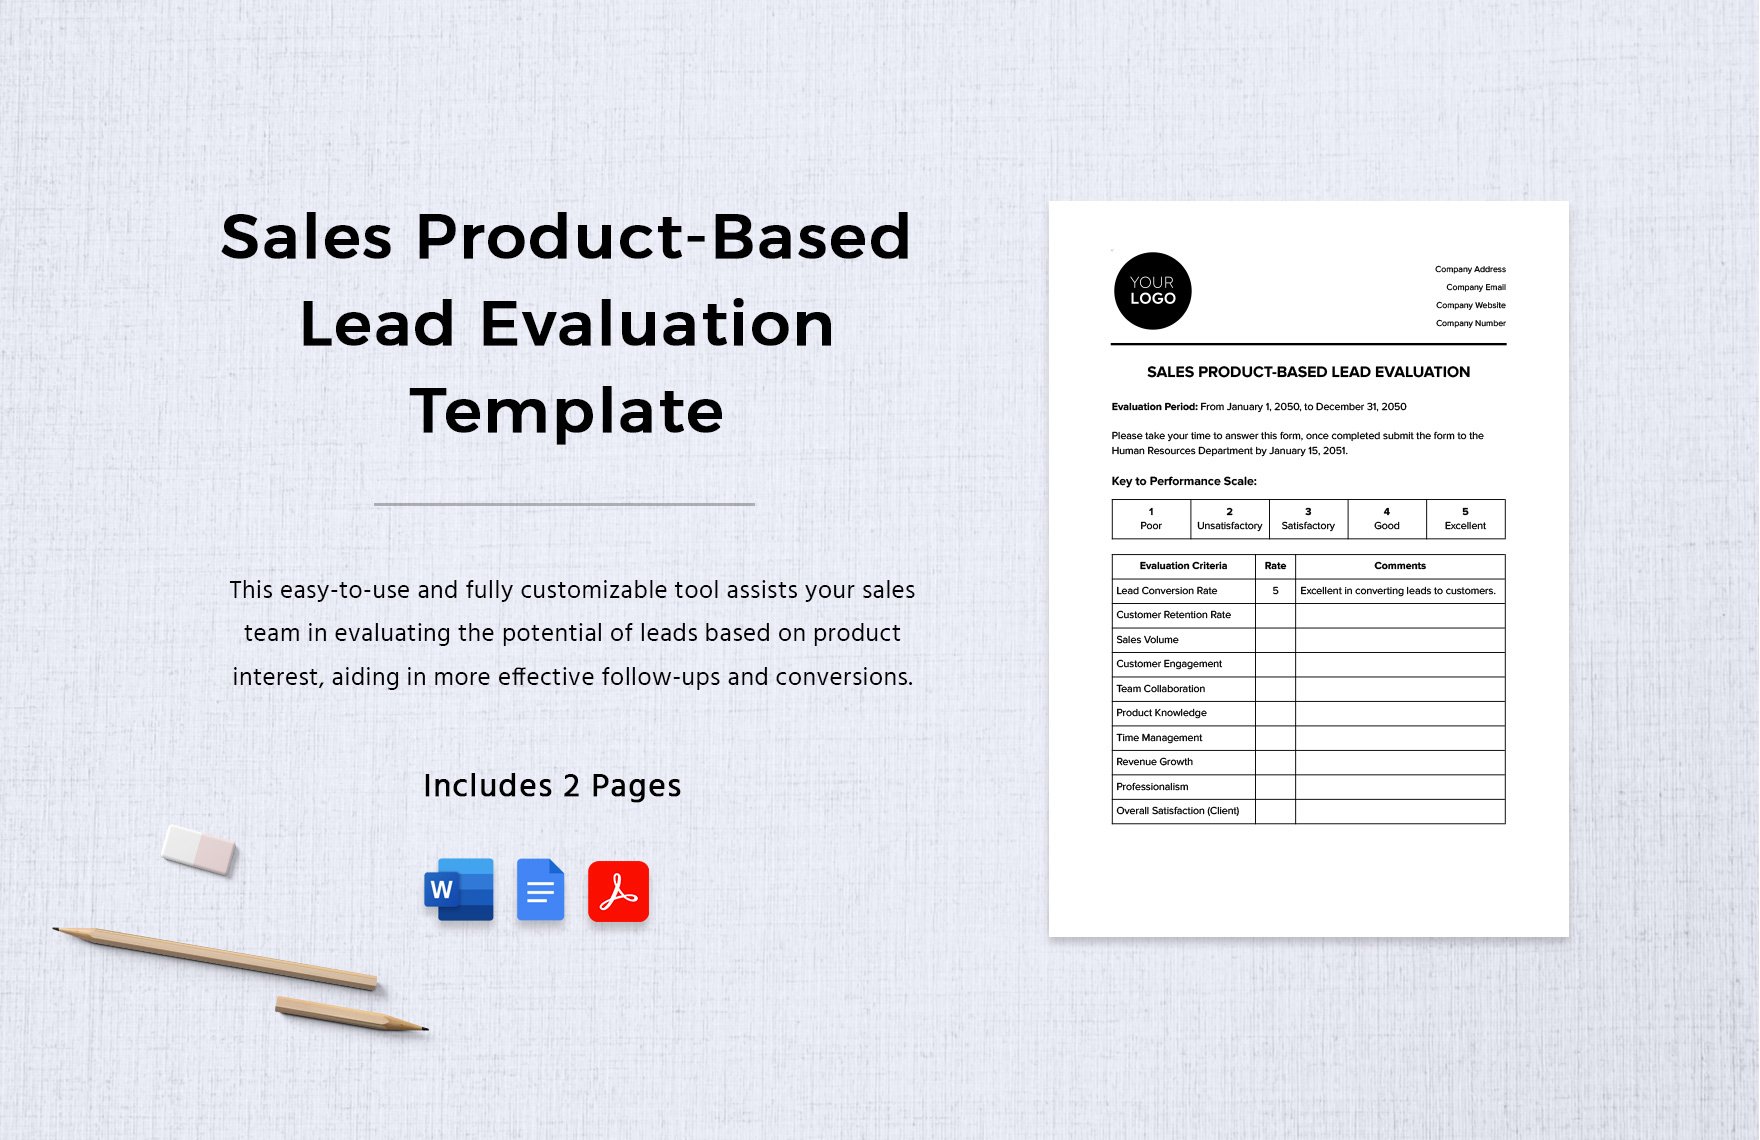 Sales Product-Based Lead Evaluation Template